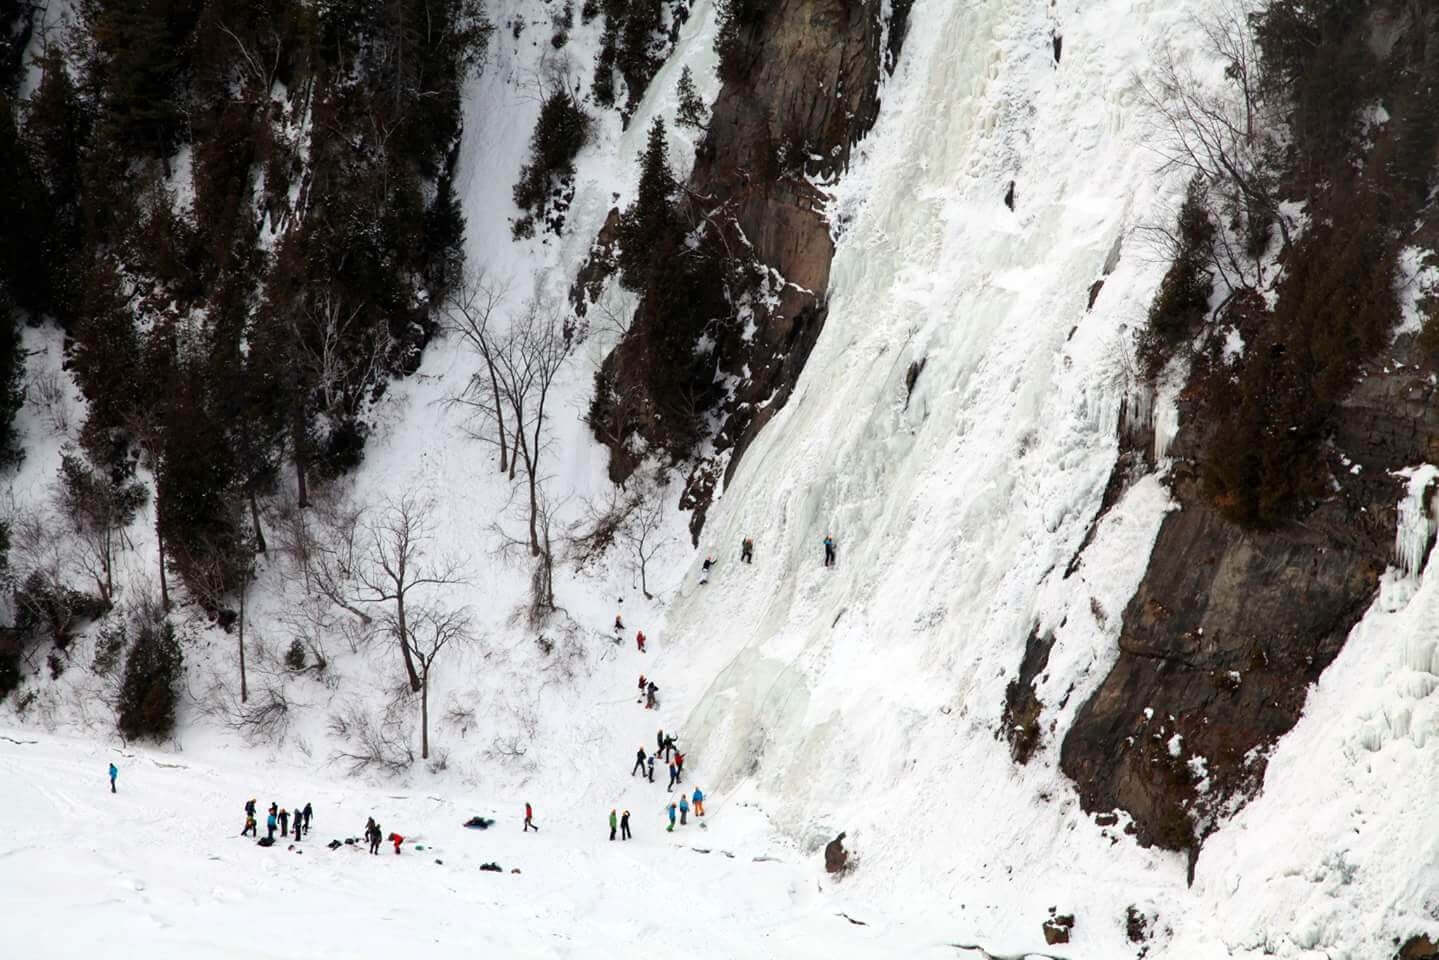 The frozen cascades of Montmorency Falls in Quebec, Canada